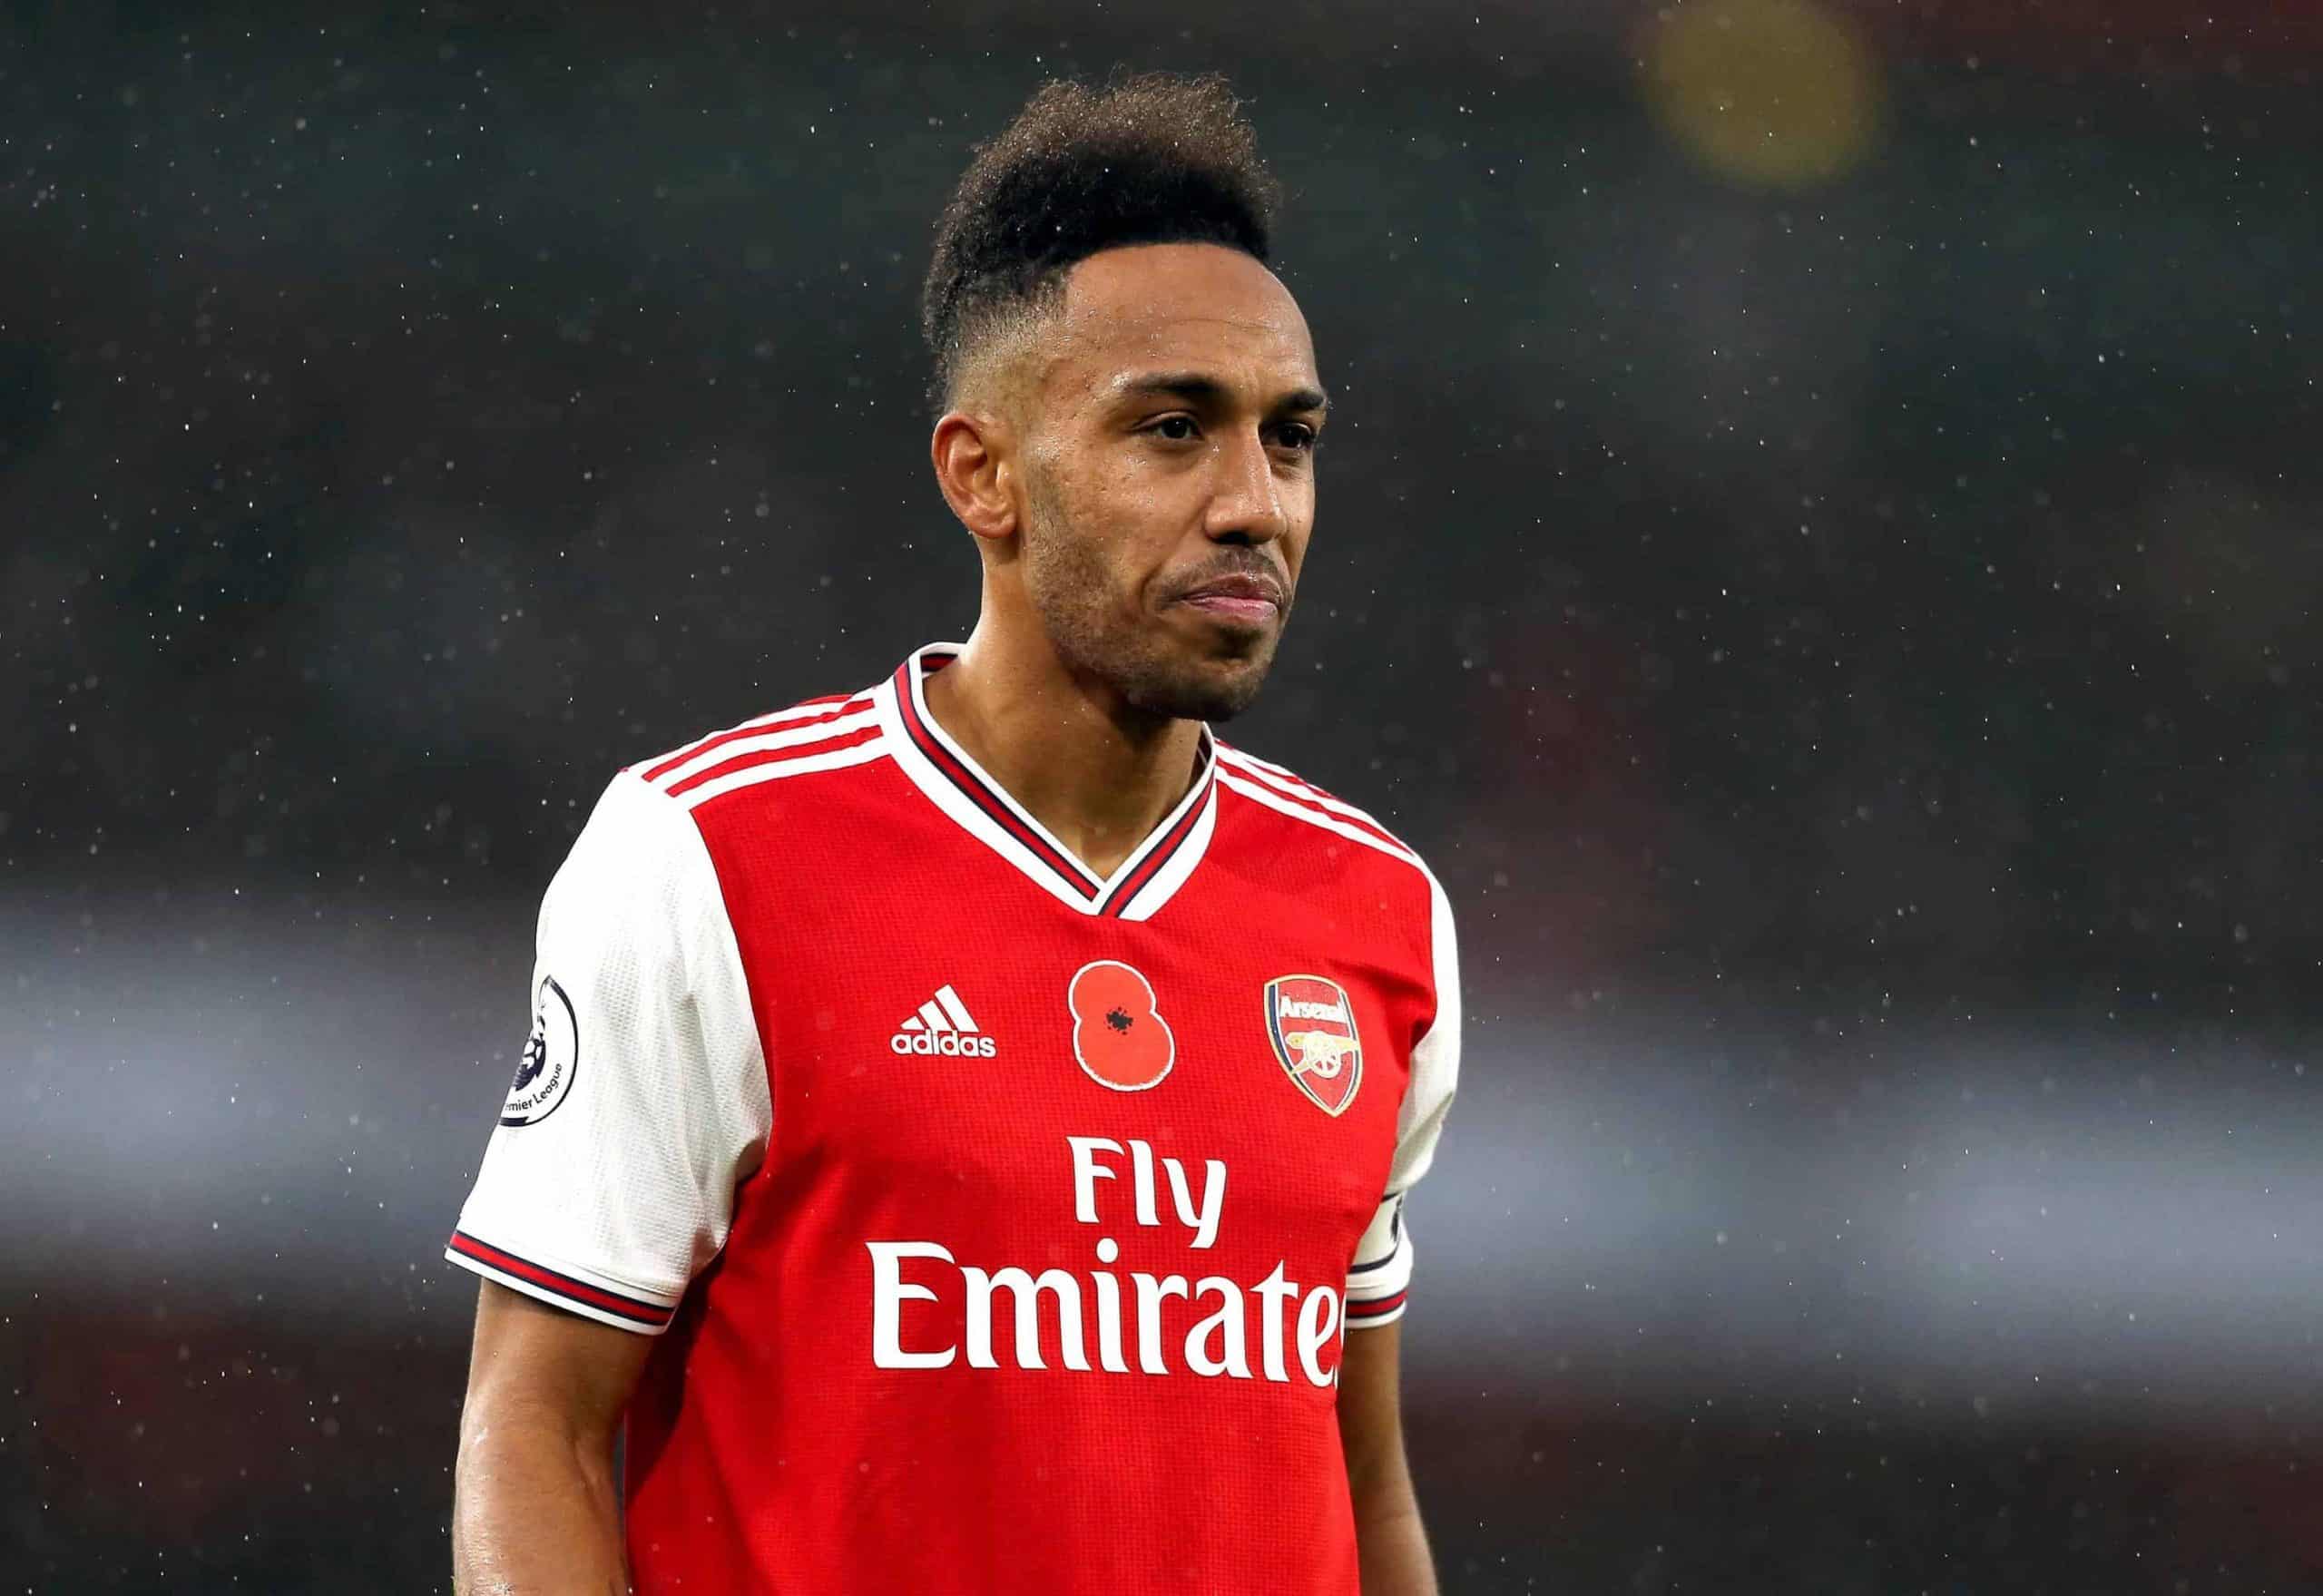 Arsenal striker to leave? Spurs boss offered cash NOT to join?